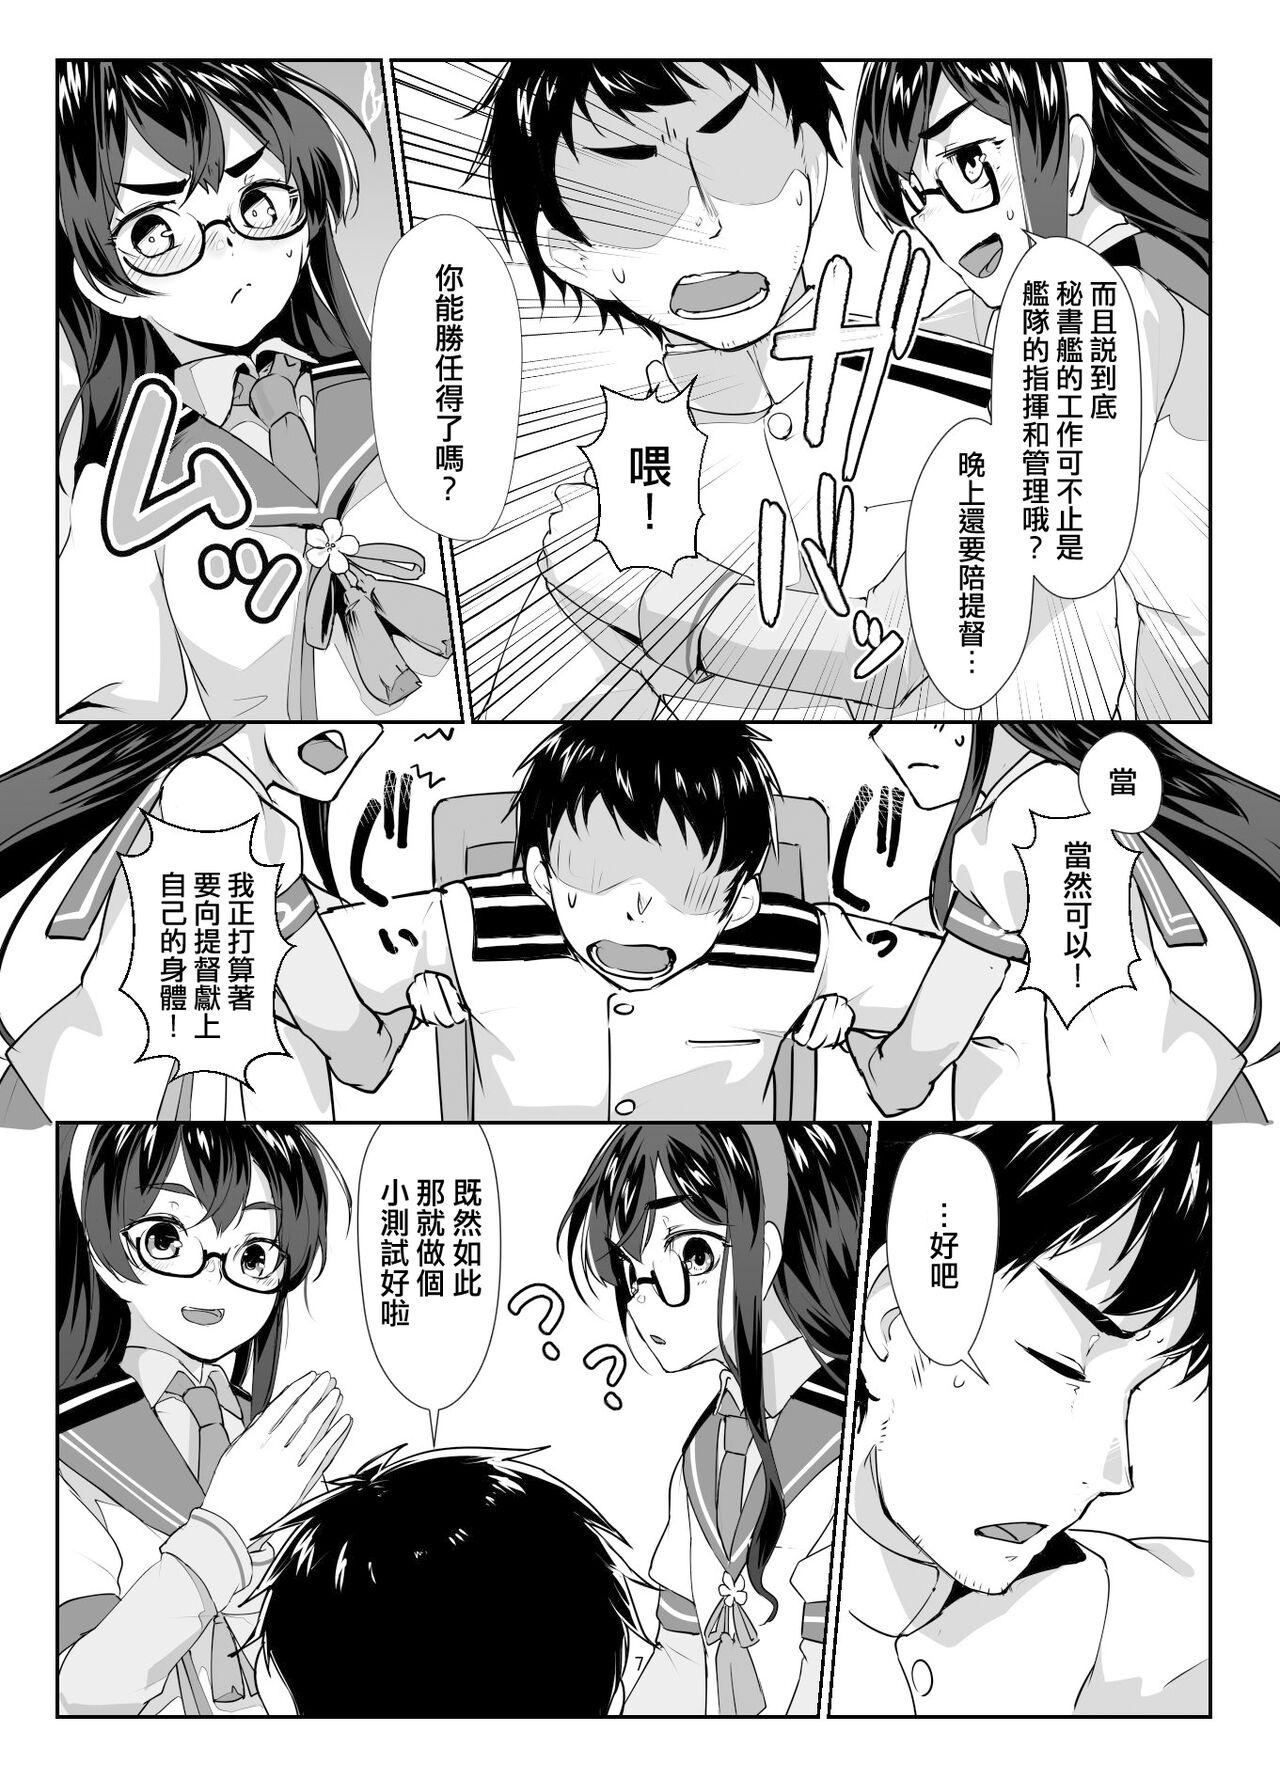 Big Penis Ooyodo x2 to Daily Ninmu - Kantai collection Freaky - Page 7